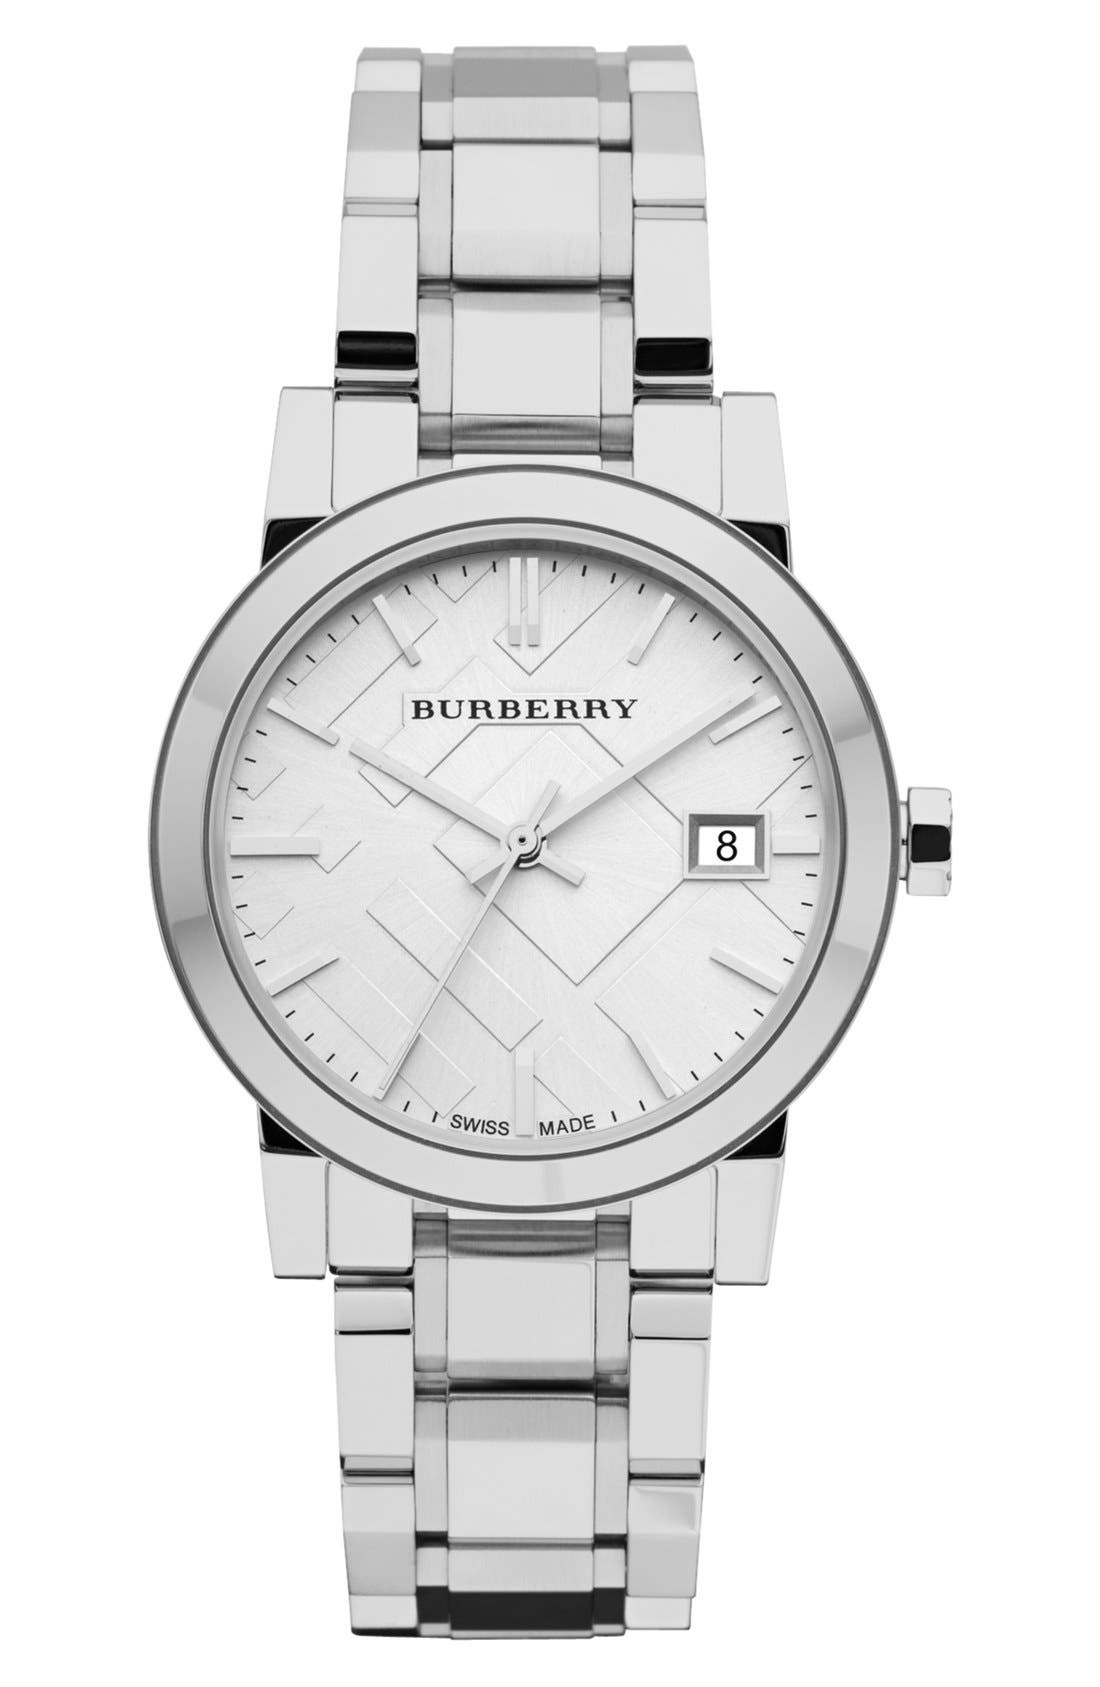 burberry stamped watch